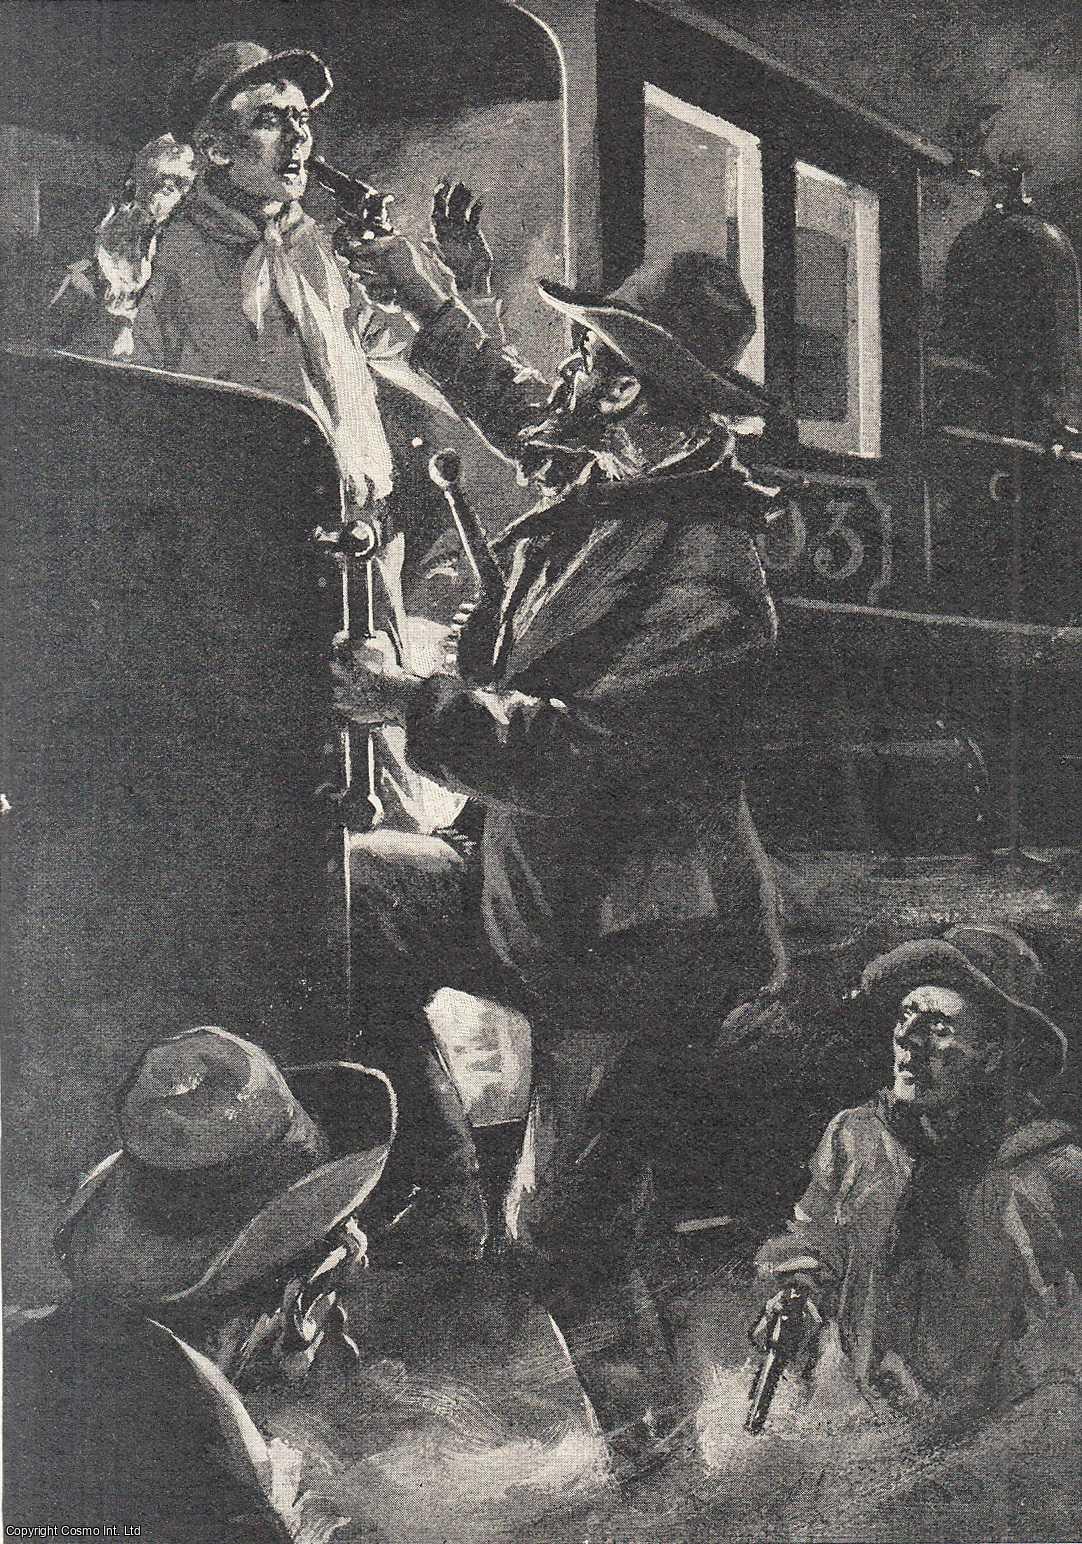 John Ransome. Illustrated by Arch Webb. - Red Rube : train robbers that plagued the railroad & express companies of America. An uncommon original article from the Wide World Magazine, 1916.